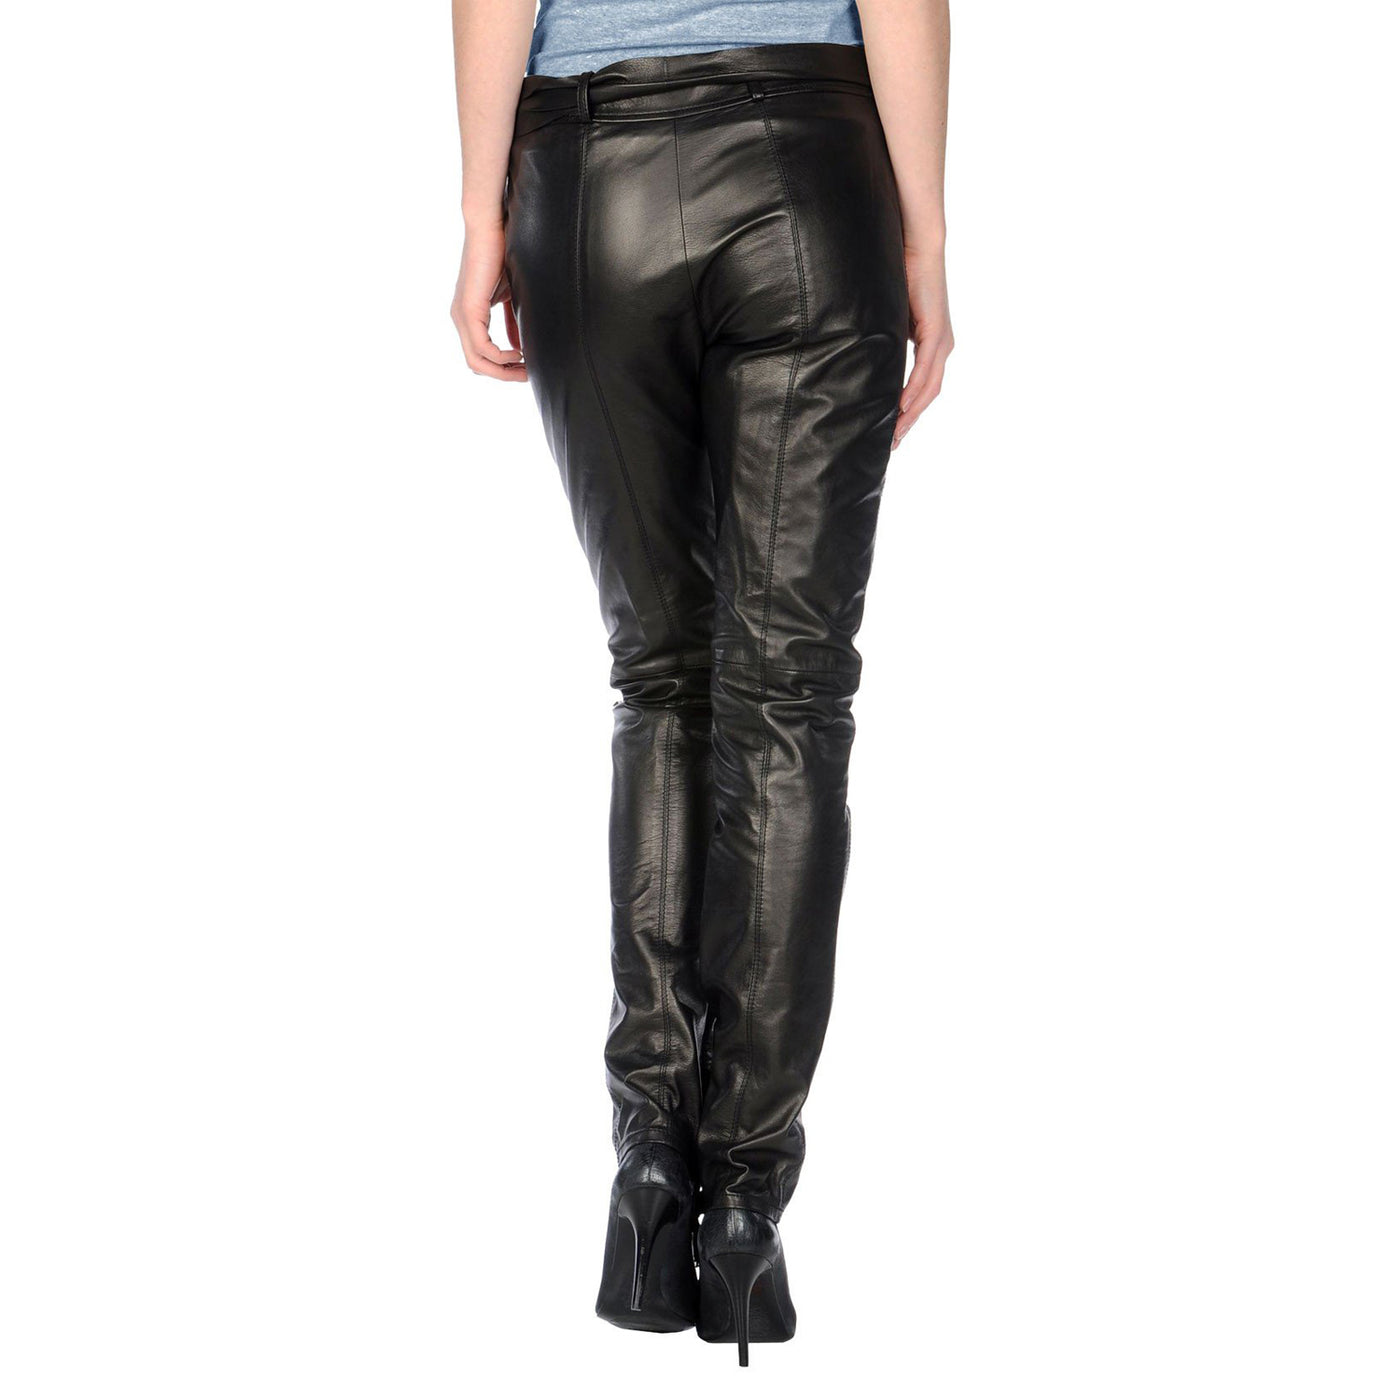 Leather pants with leather belt (style #8) - Lusso Leather - 2